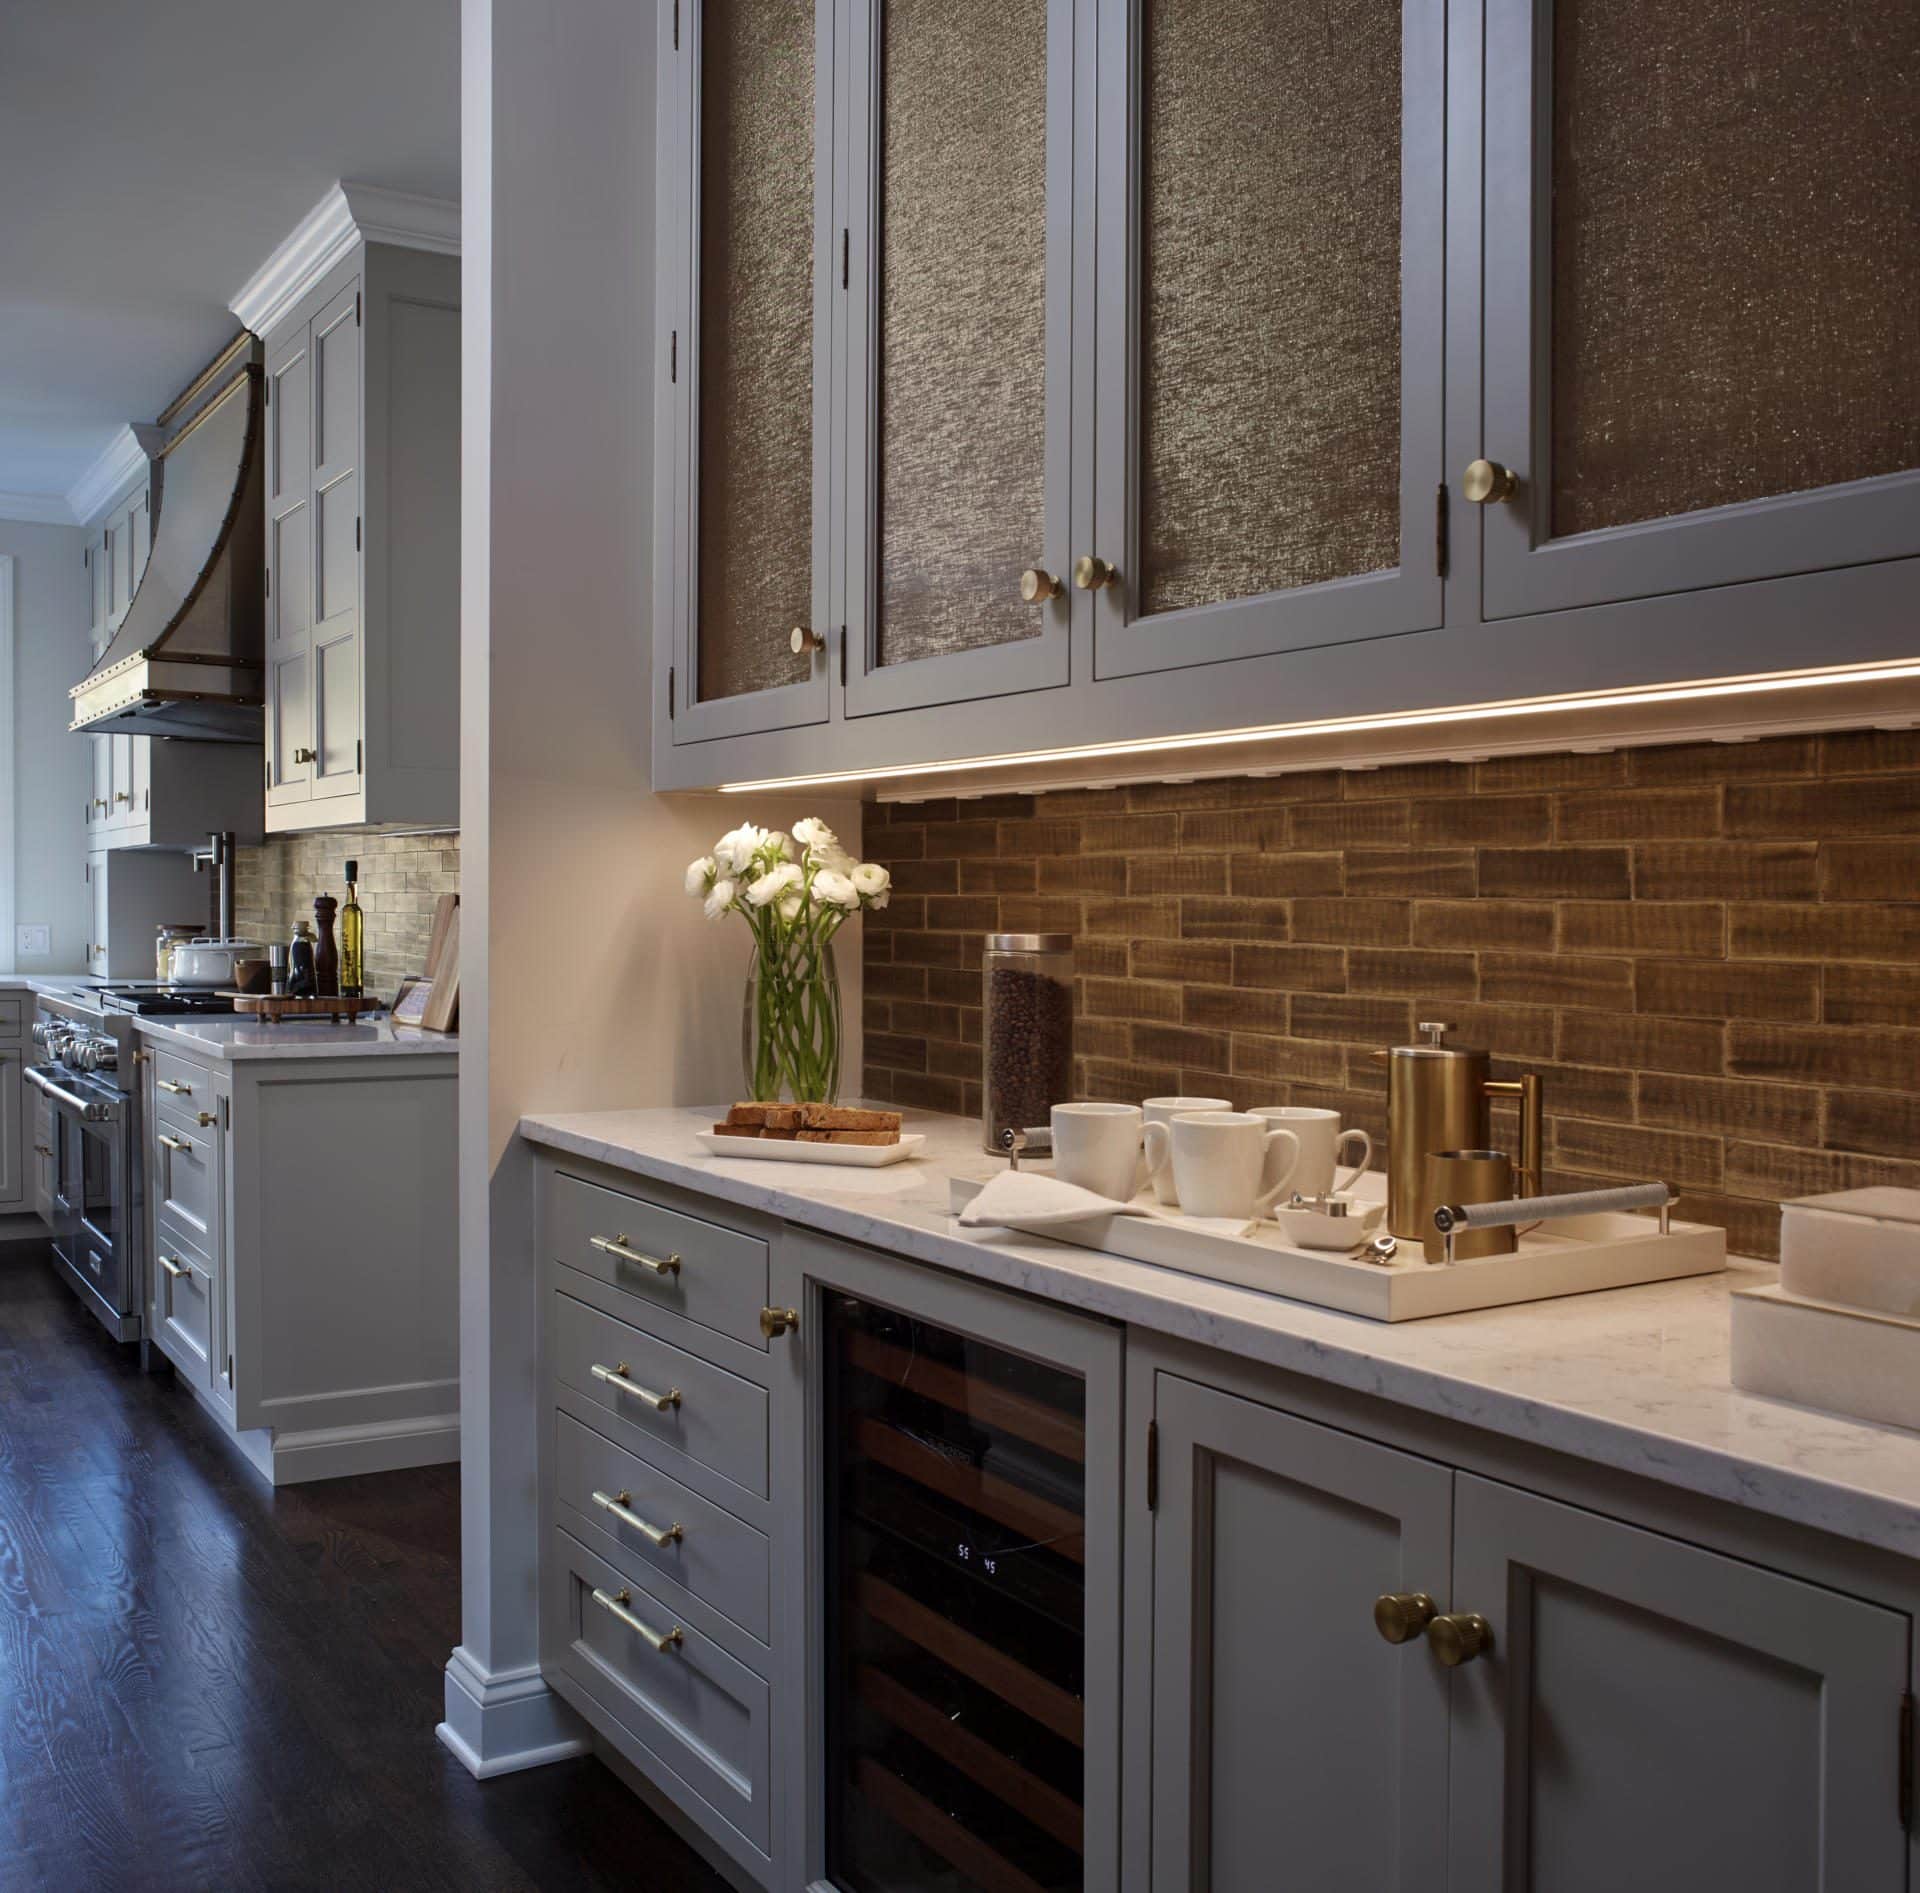 Taupe Butler's Pantry with Shimmery Inserts for the Wall Cabinets and Bronze Brick Backsplash